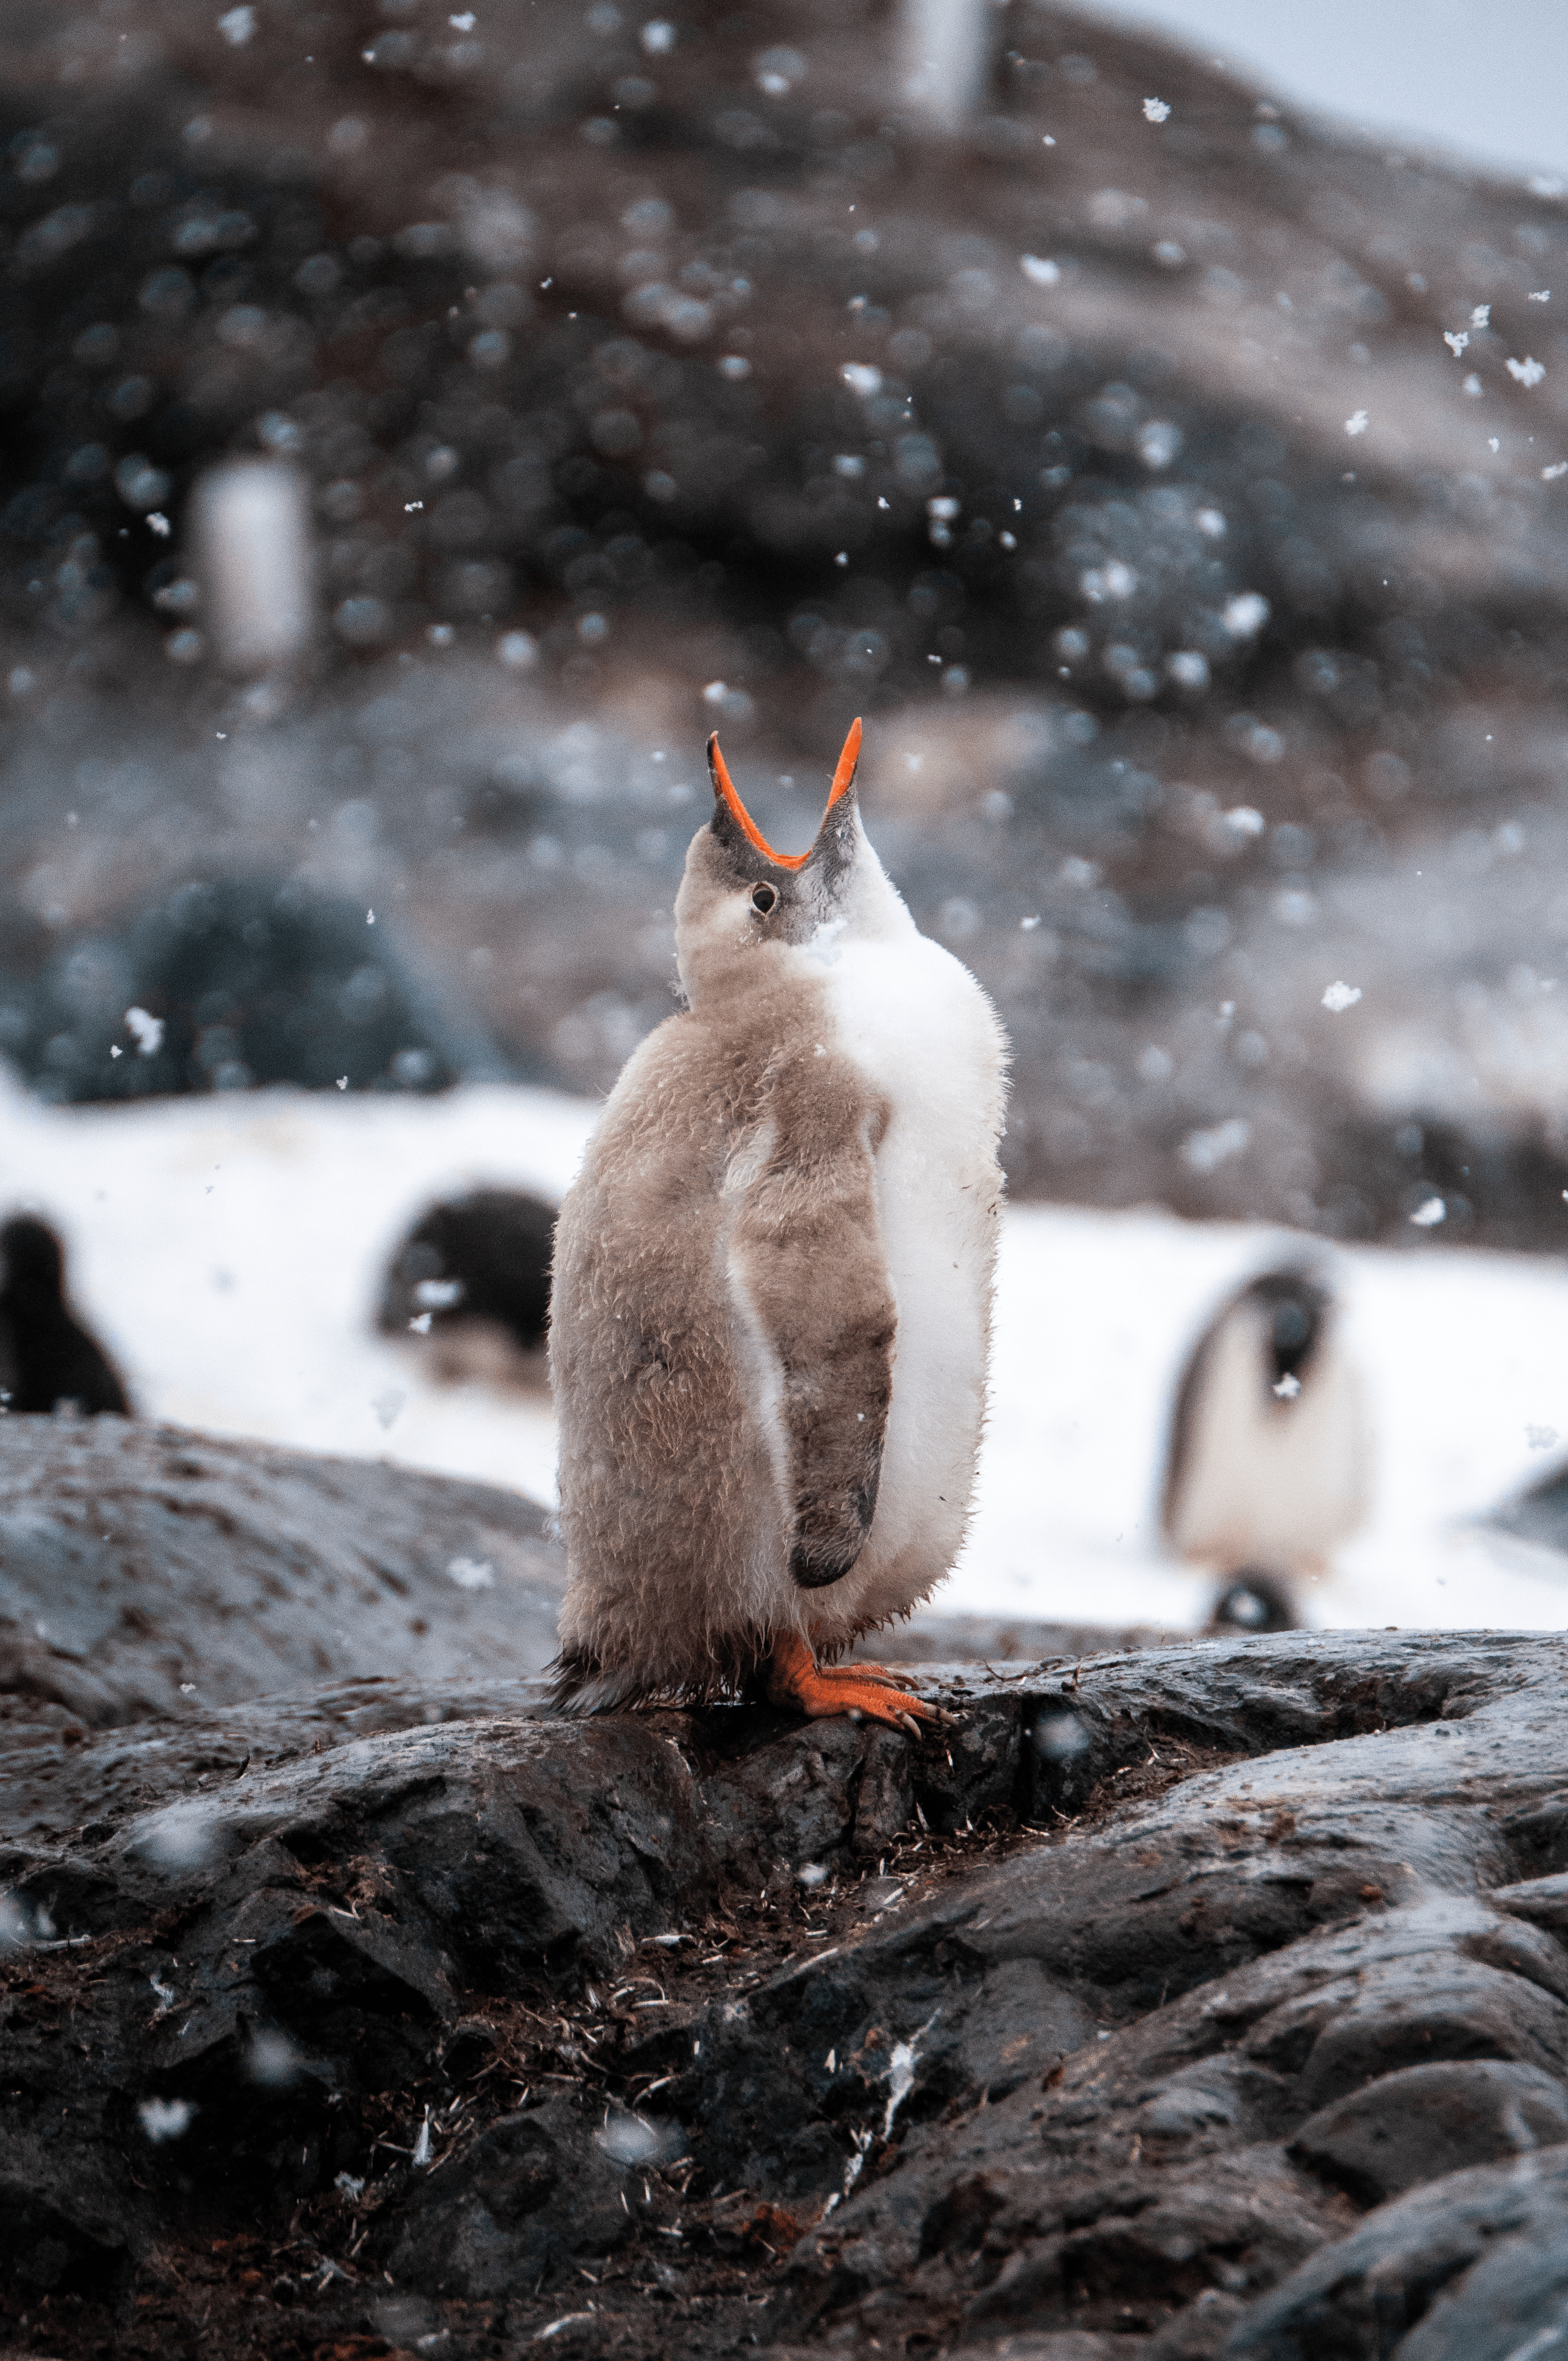 Catching Snowflakes - Lucy The Rare White Leucistic Penguin Chick in Antarctica